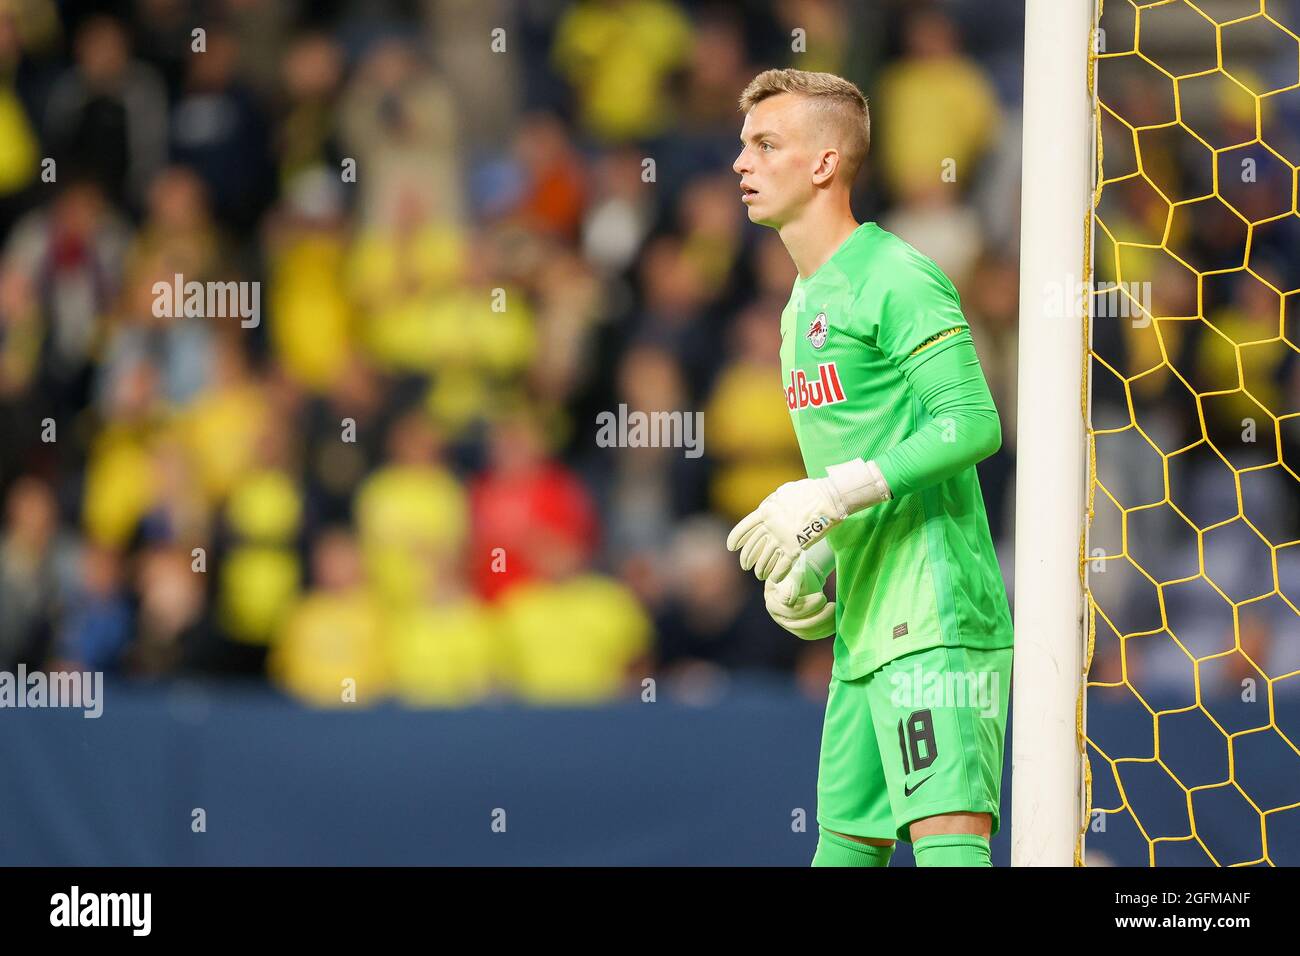 Broendby, Denmark. 25th Aug, 2021. Goalkeeper Philipp Köhn (18) of FC Red Bull Salzburg seen during the UEFA Champions League qualification match between Broendby IF and FC Red Bull Salzburg at Broendby Stadion in Broendby. (Photo Credit: Gonzales Photo/Alamy Live News Stock Photo